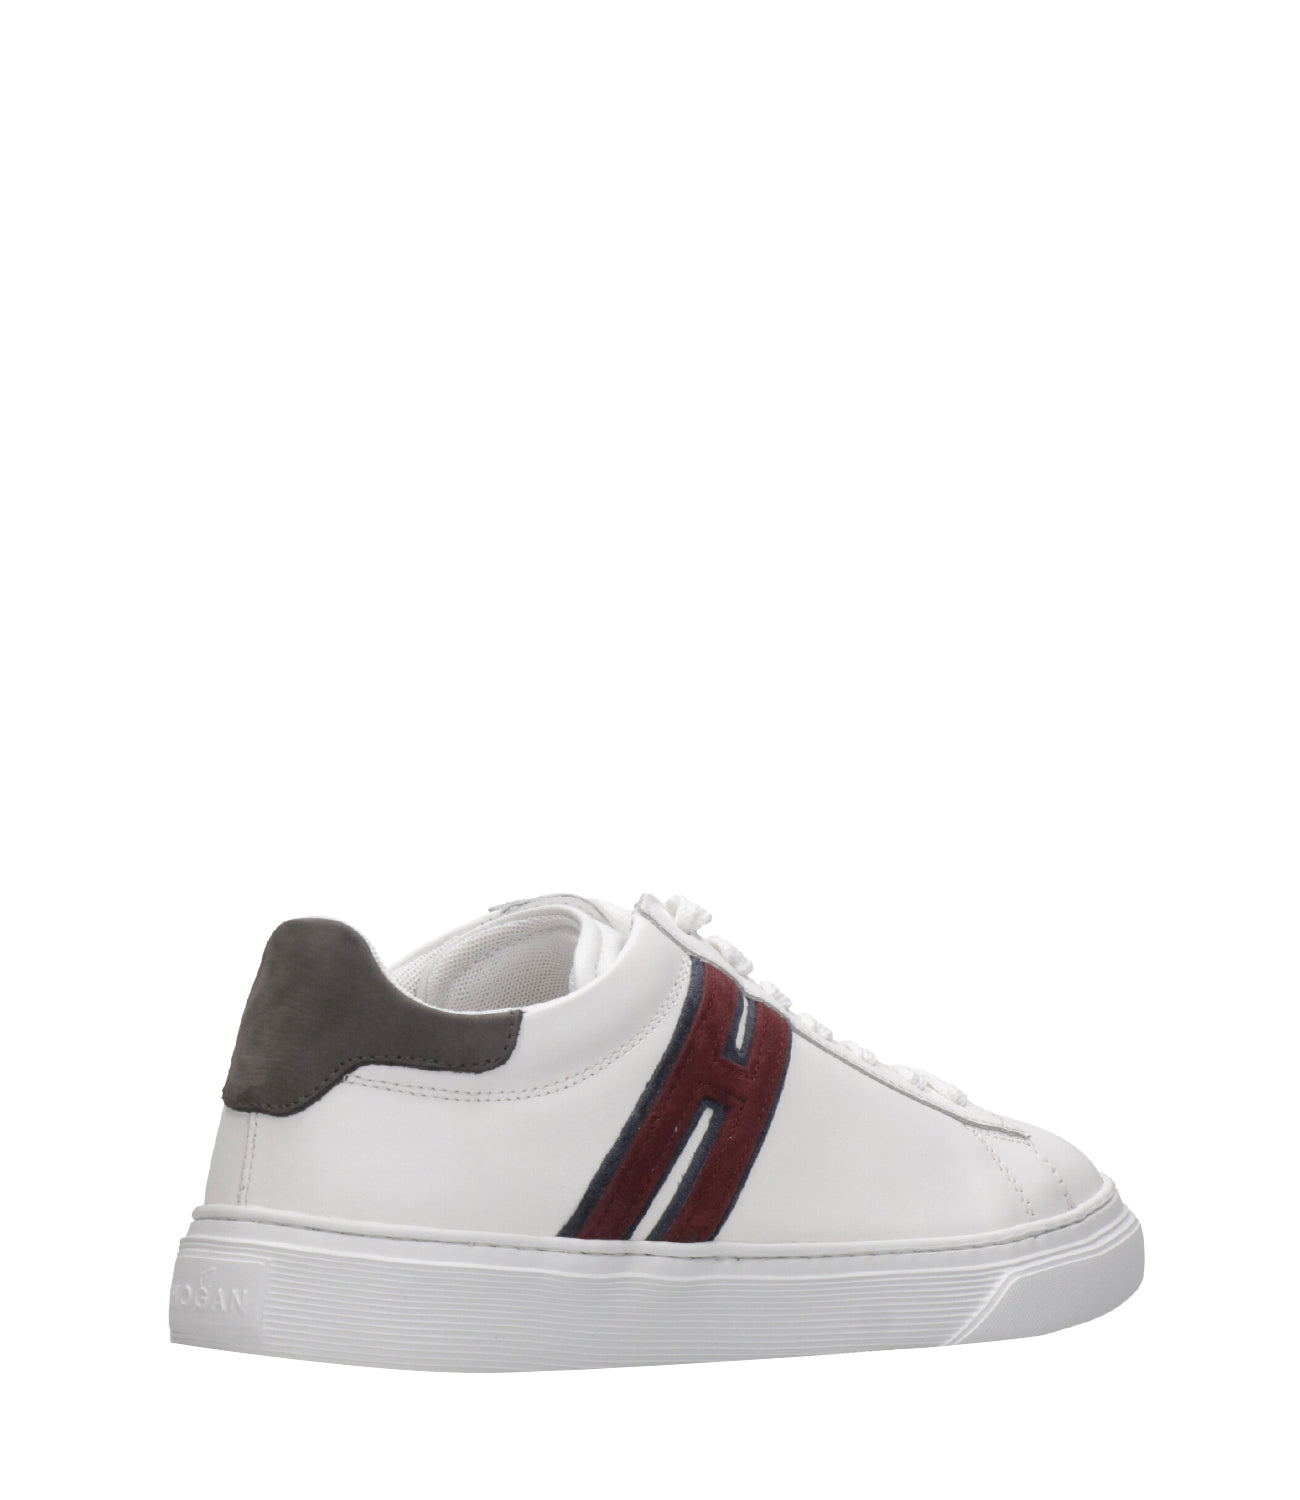 Hogan | Sneakers H365 Lace-up H Canaletto White and Bordeaux